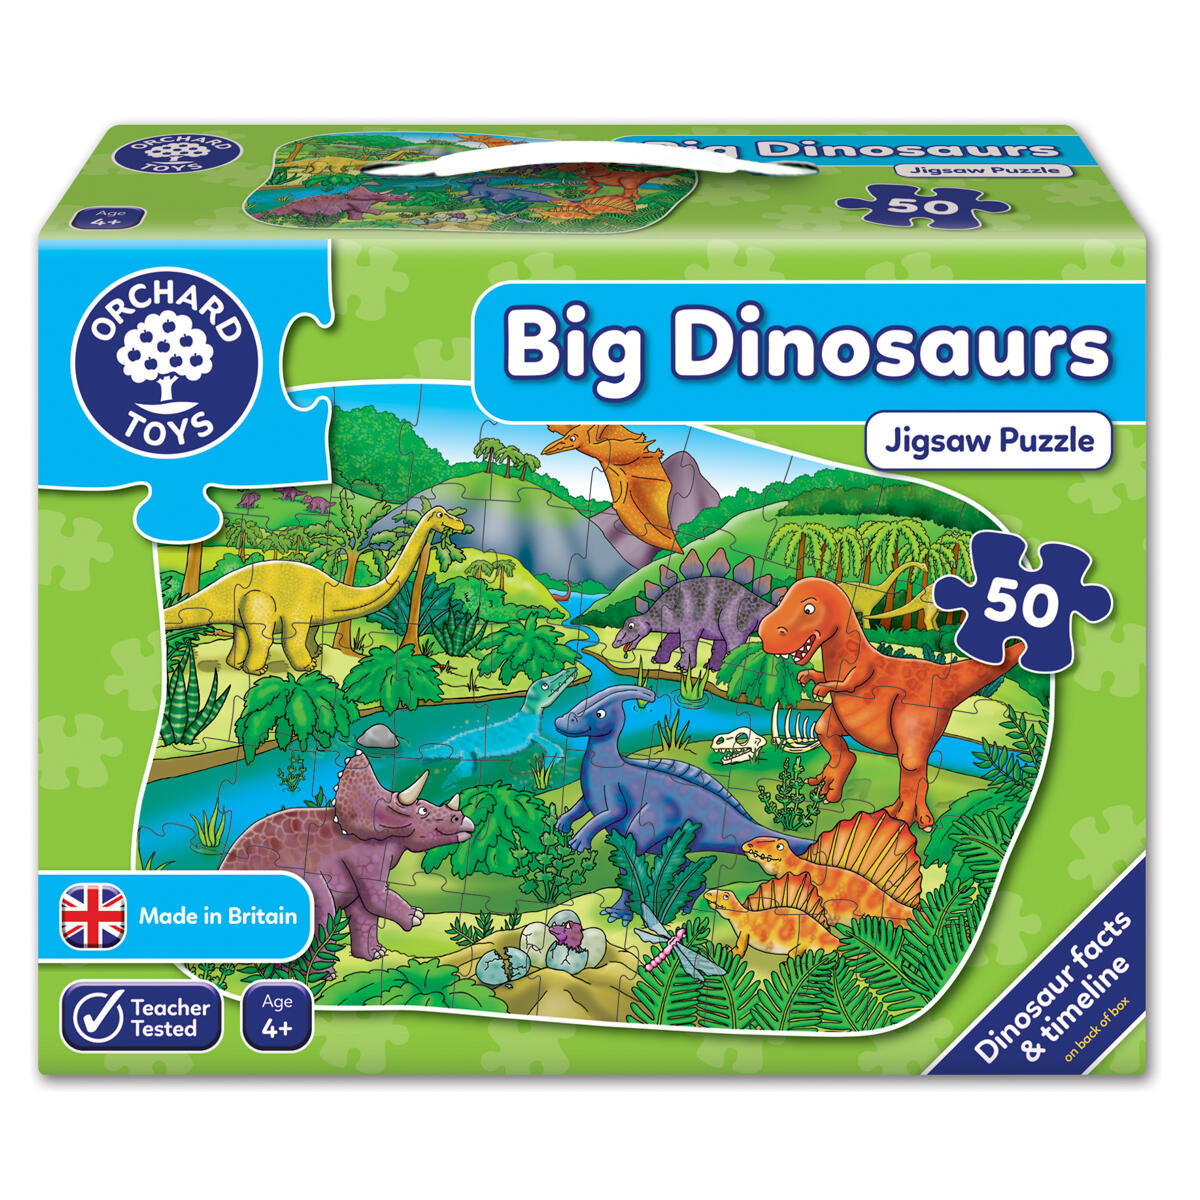  orchard toys big dinosaurs jigsaw puzzle 50 piece